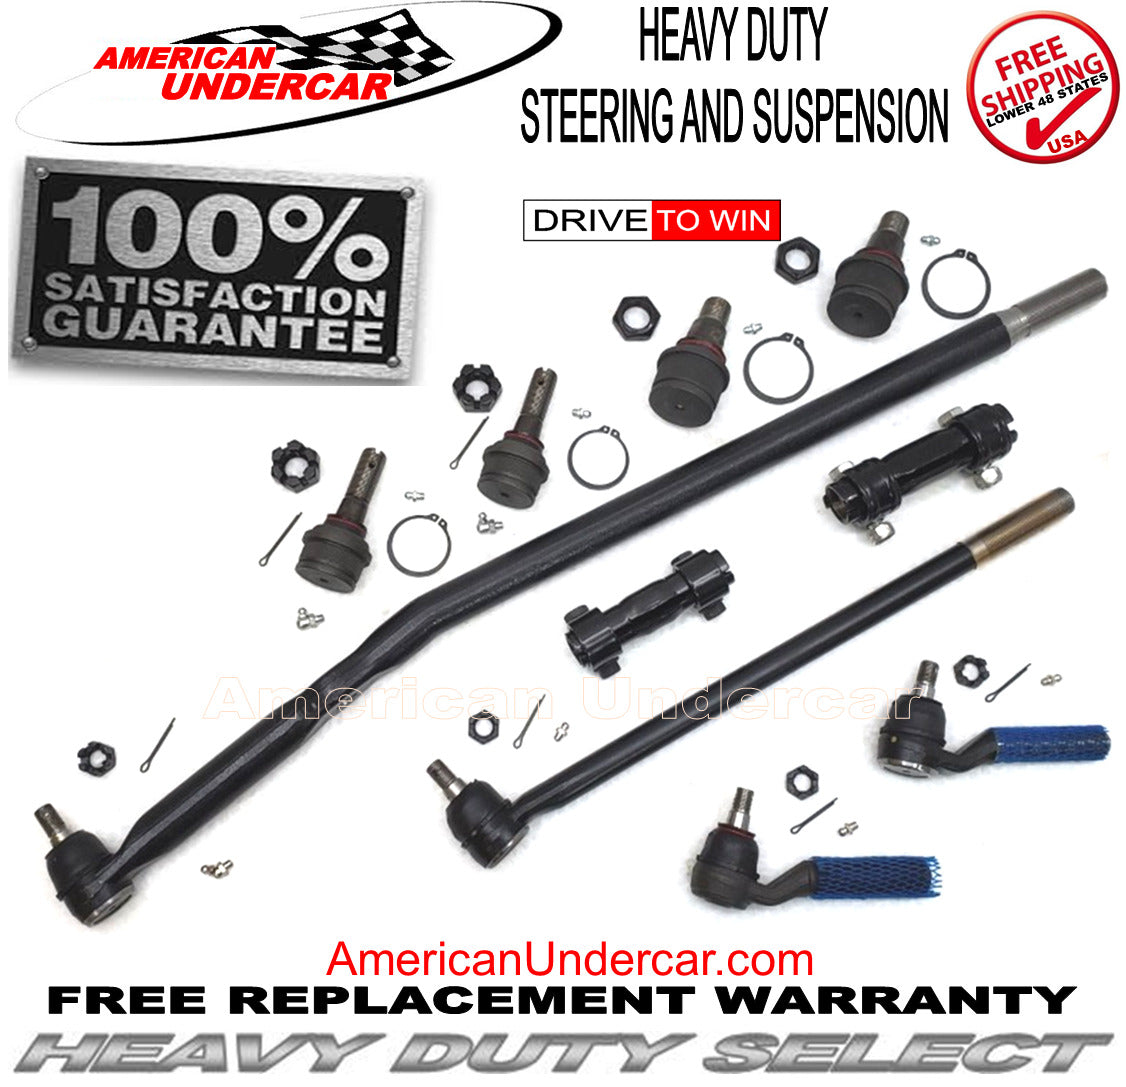 HD Ball Joint Tie Rod Drag Link Sleeve Steering Kit for 1995-1996 Ford F250 4x4 3850lb Axle